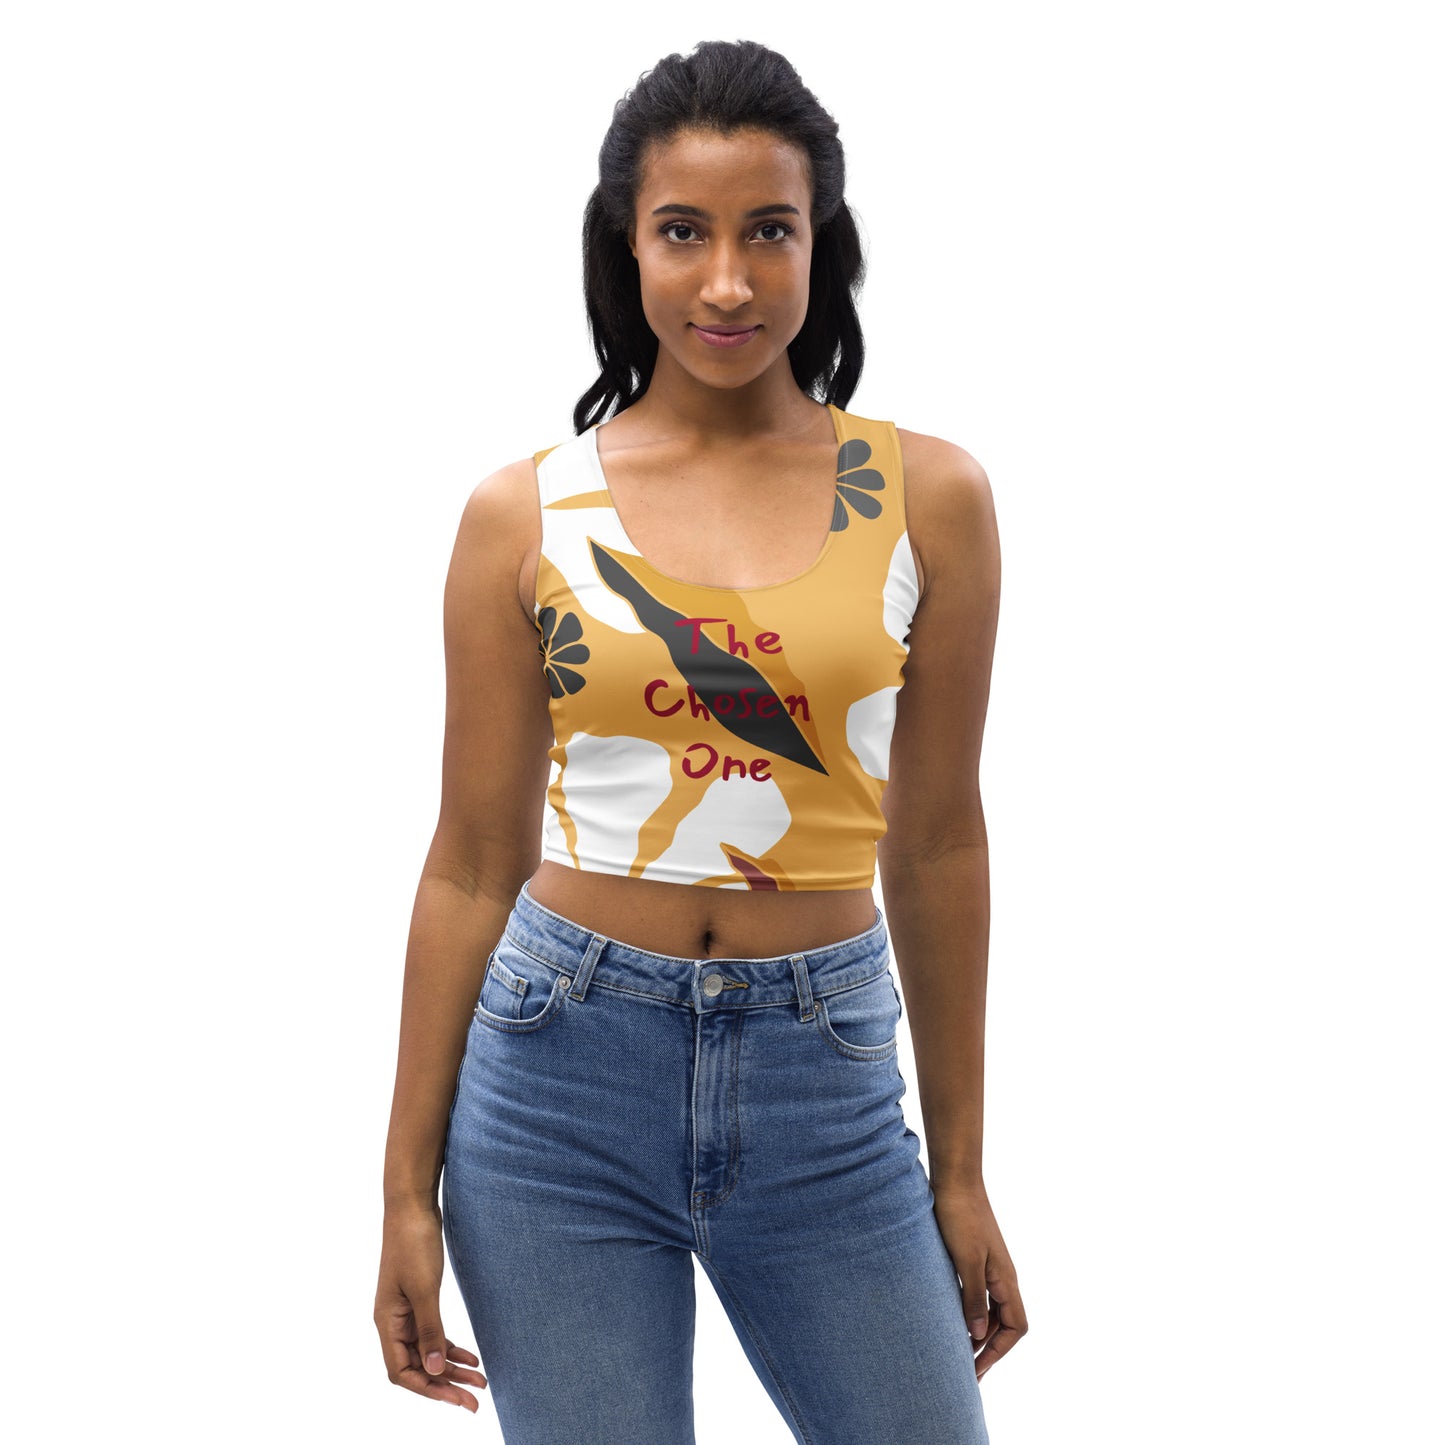 White Flowers Crop Top - The Chosen One